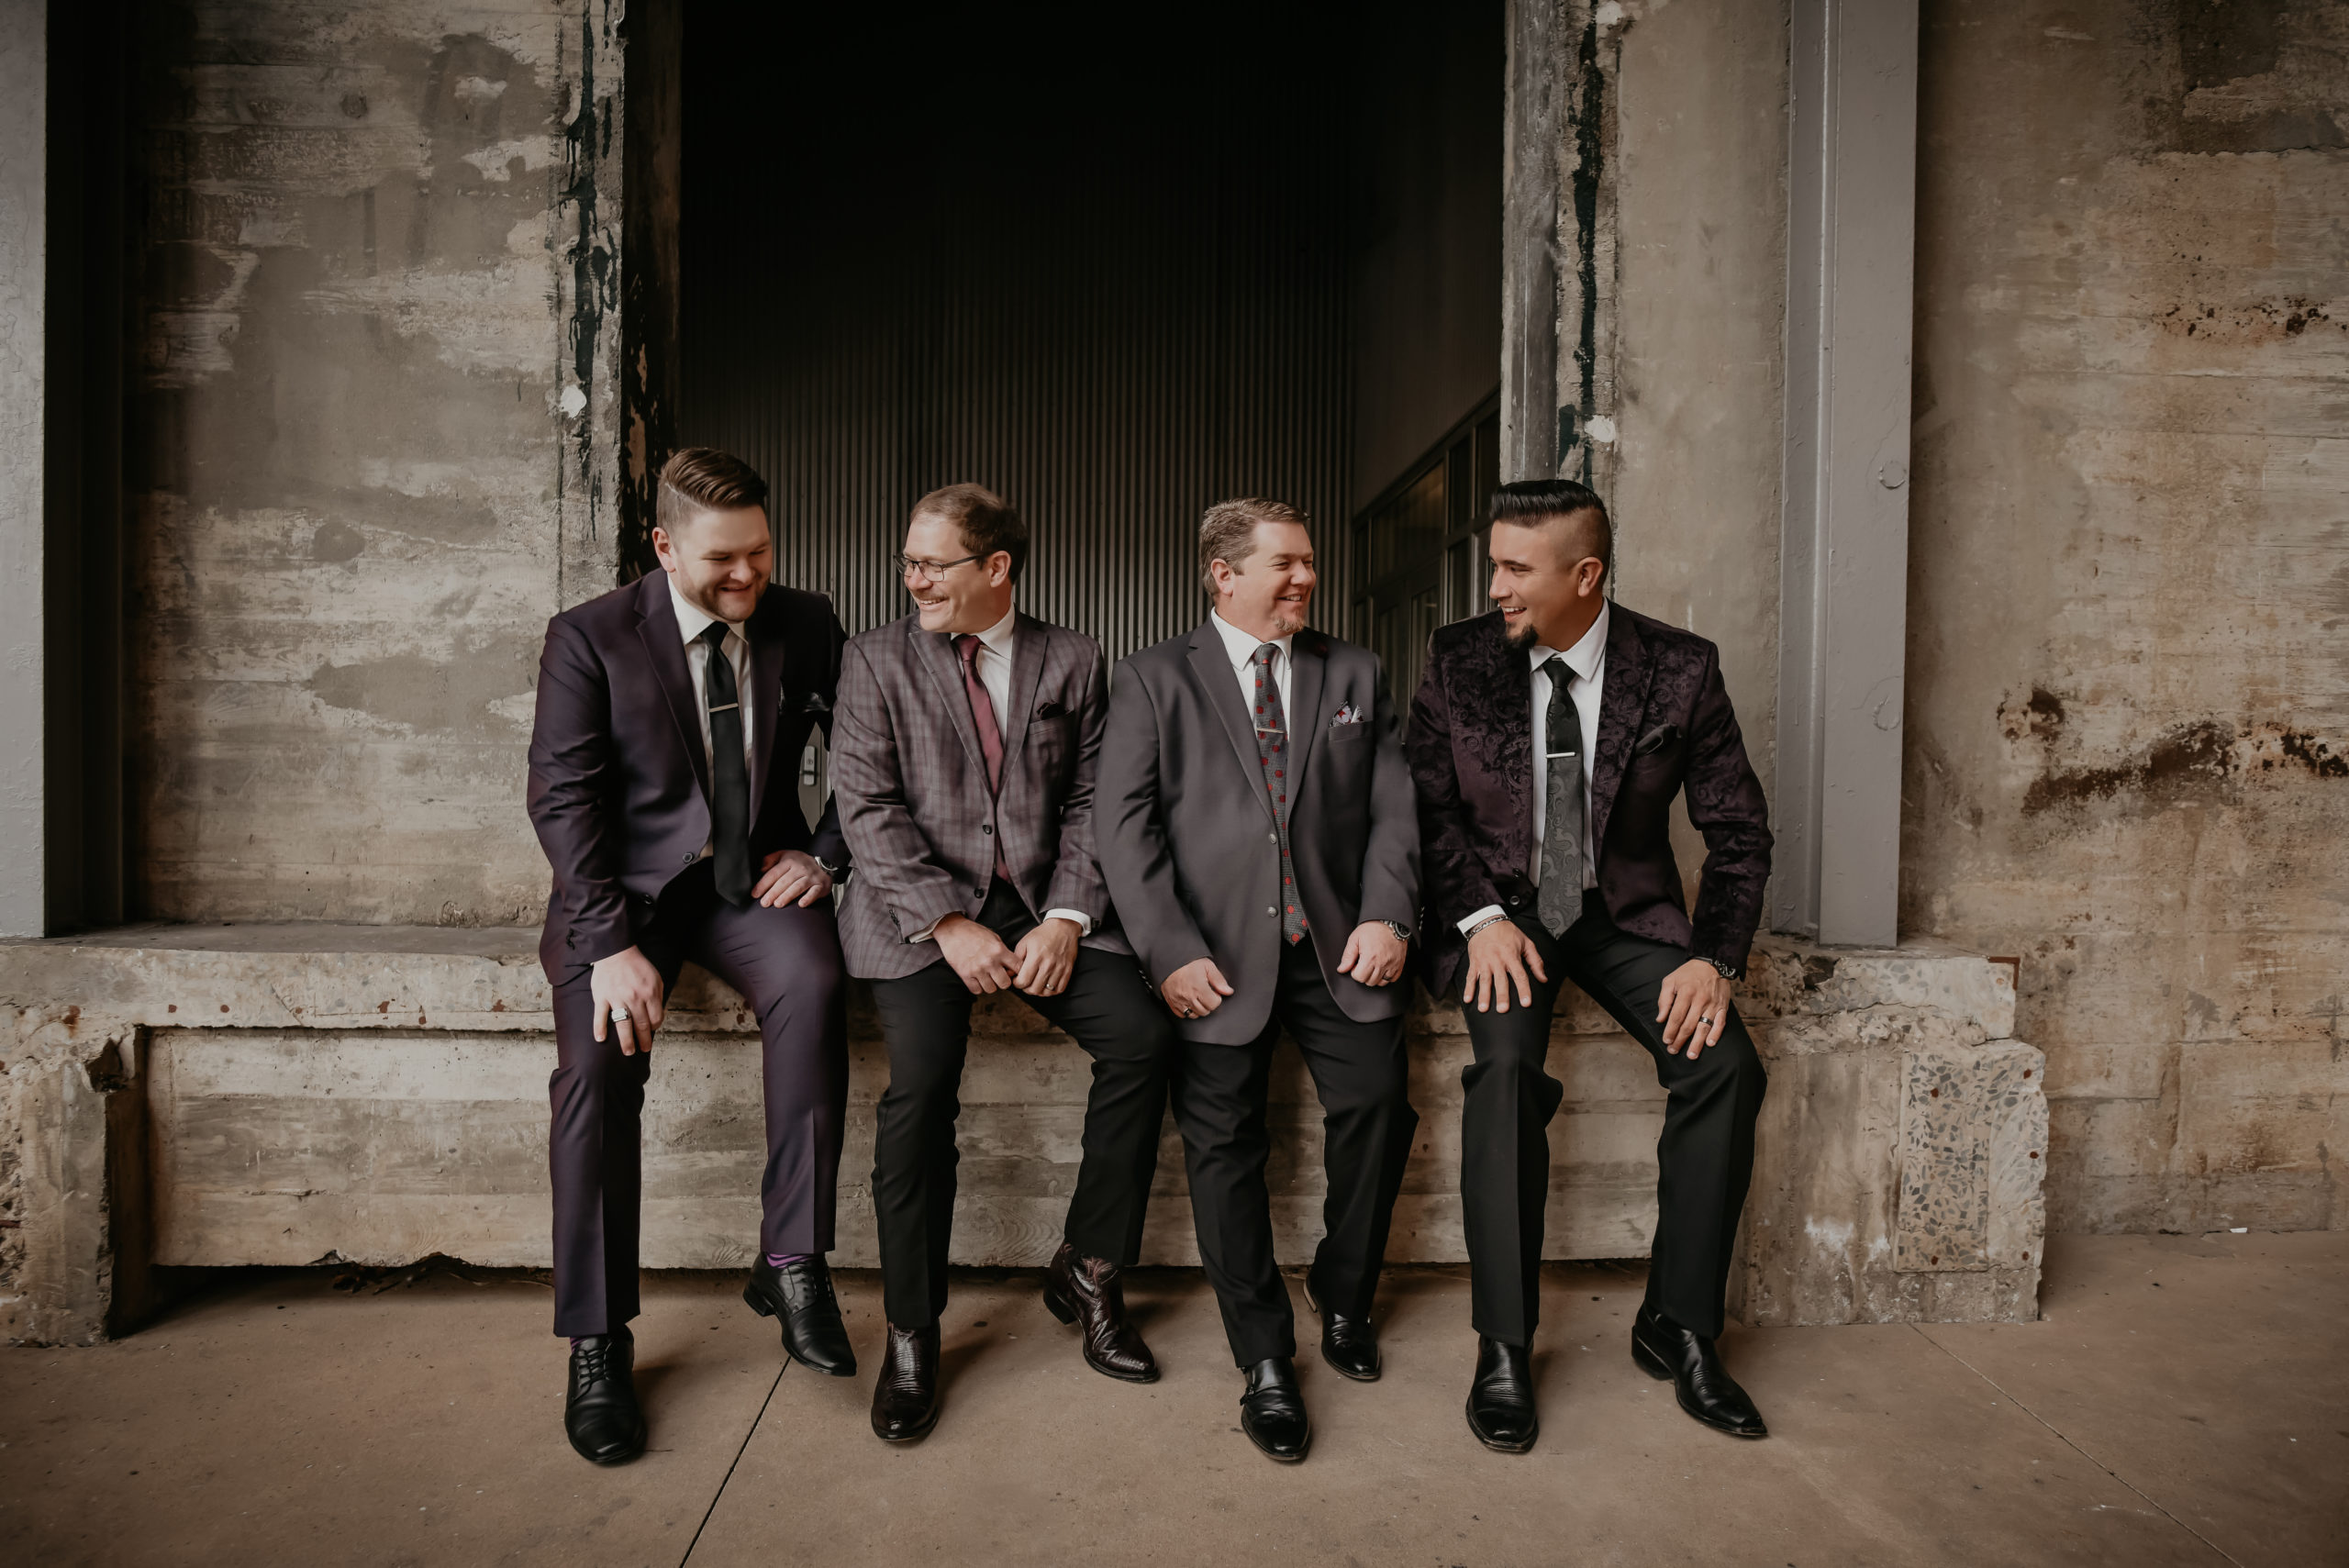 The name "The Down East Boys" is practically synonymous with Southern Gospel Music. You've probably sat in the pew during one of their concerts, or tapped your toe to one of their tunes